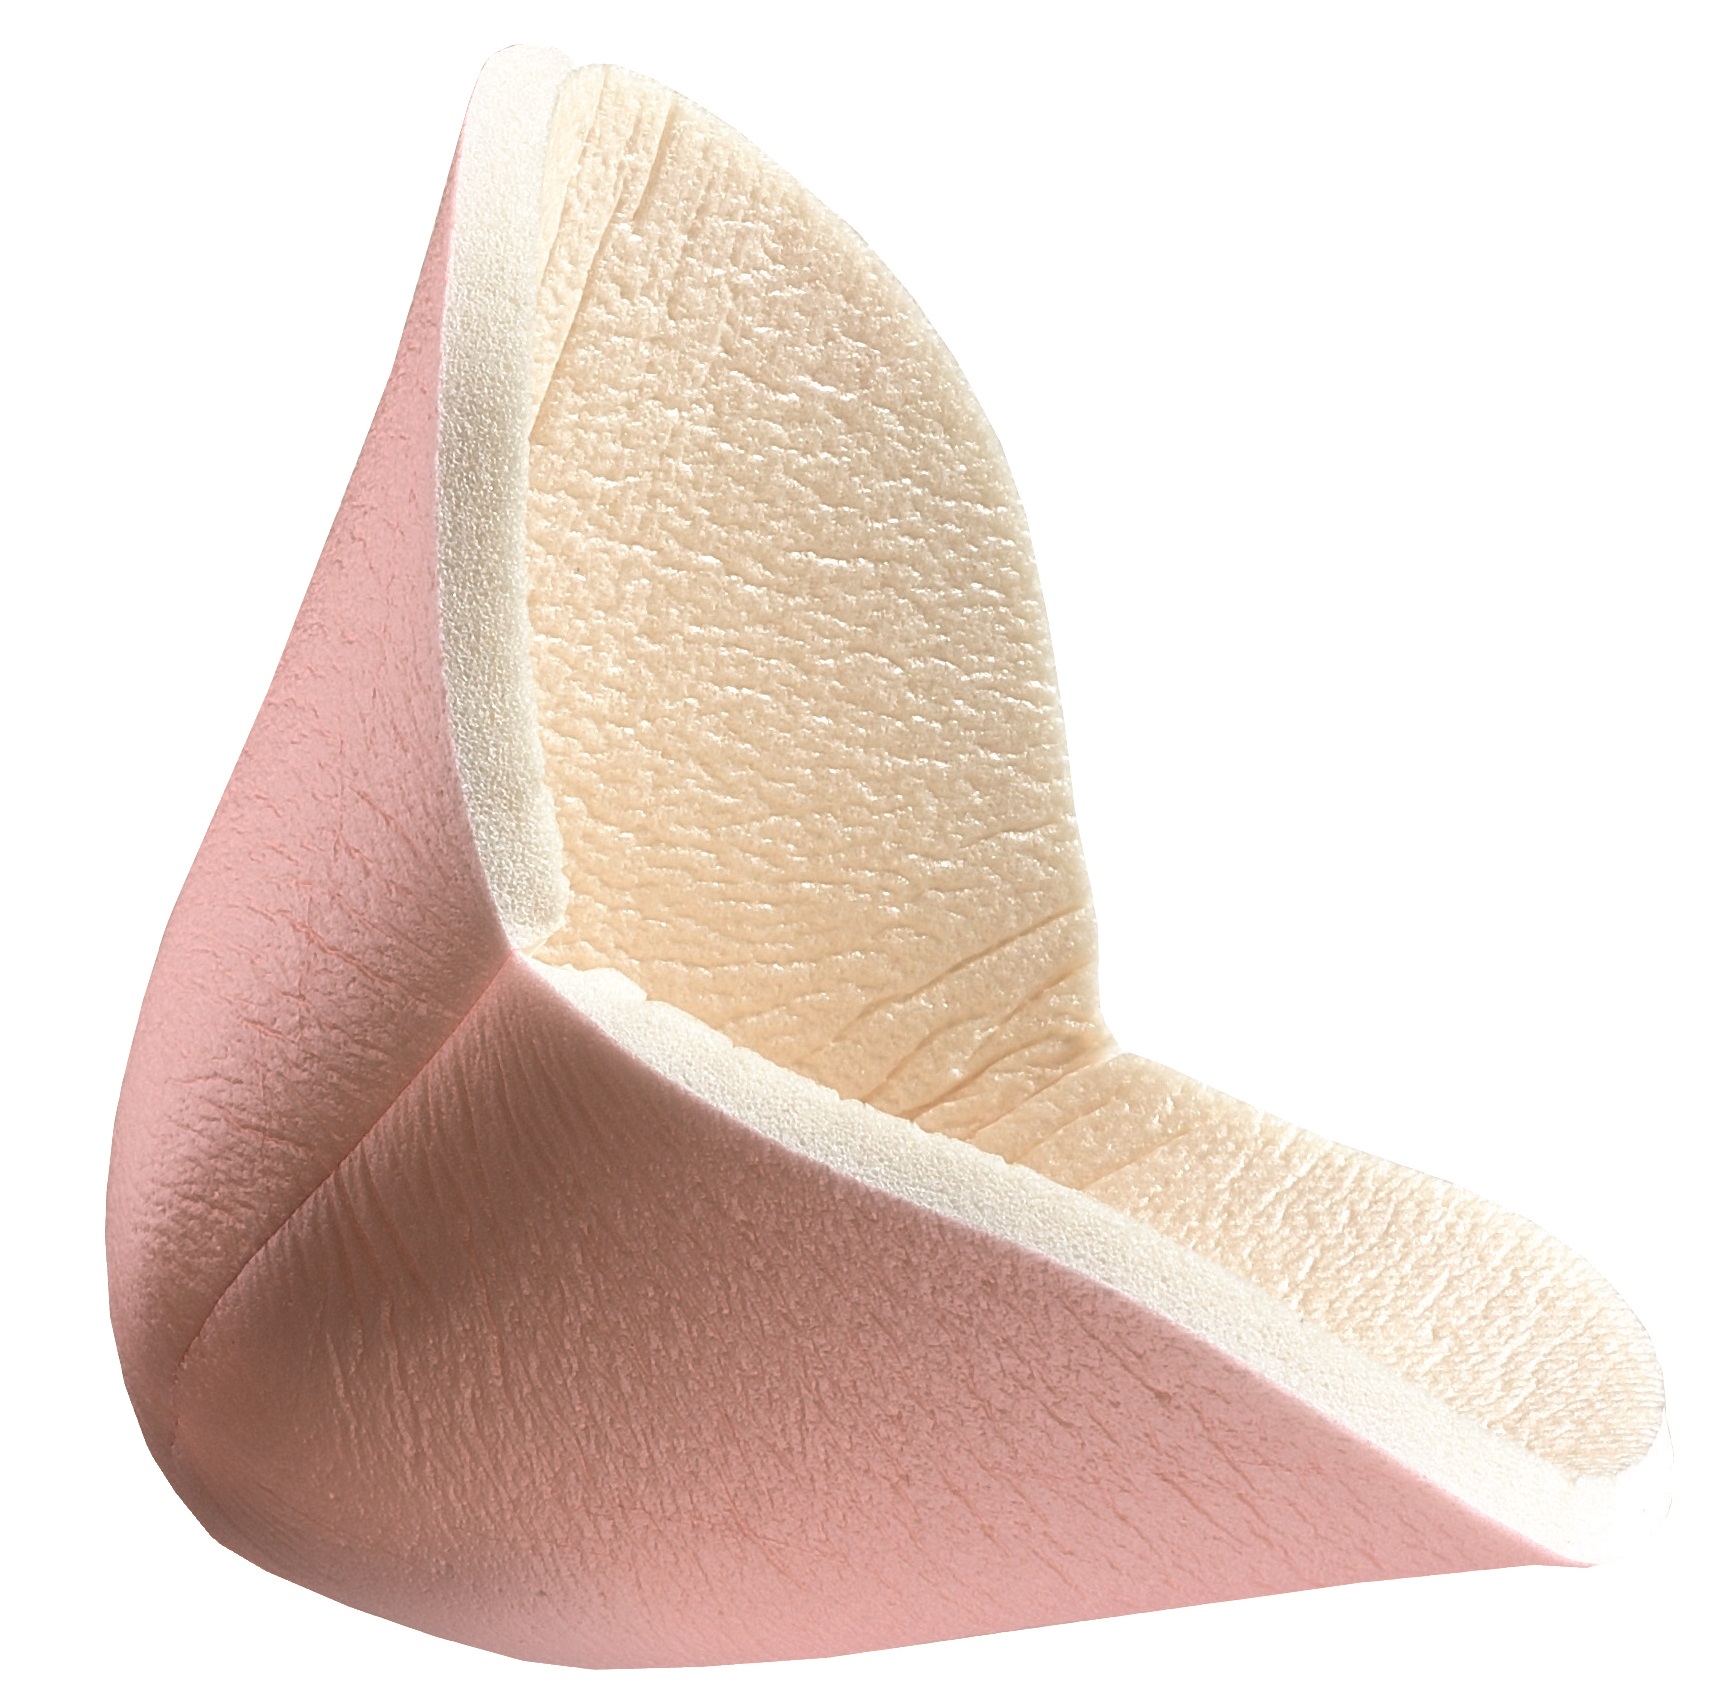 Allevyn Non-Adhesive Dressing Heel Shaped